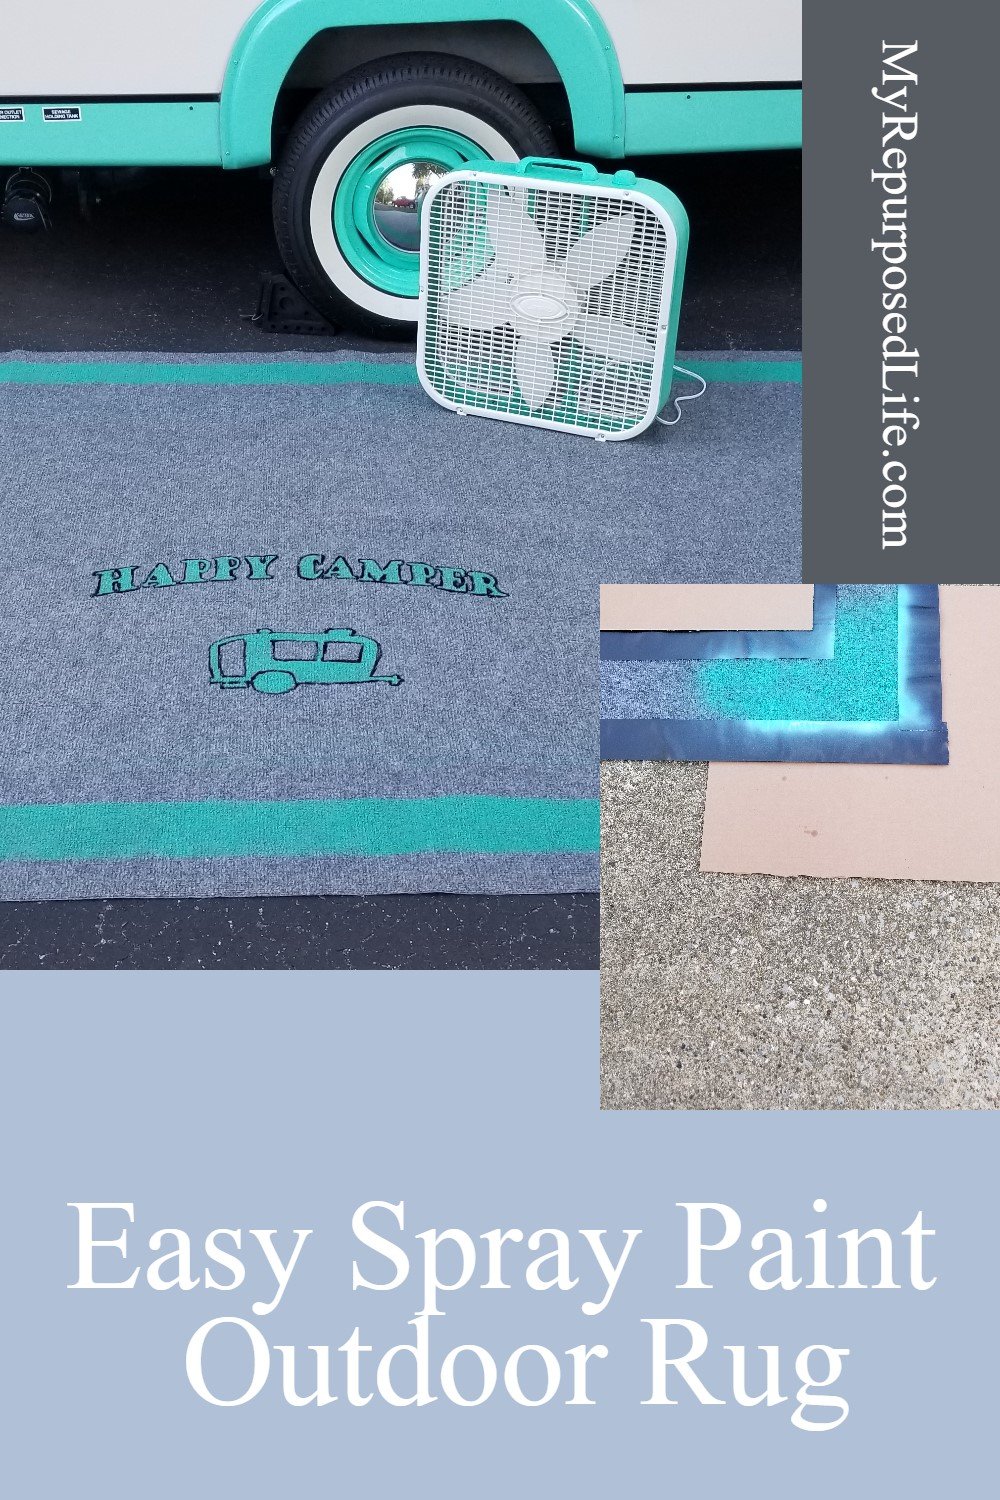 This spray painted outdoor rug project is so easy, you can do it this weekend! I'll give you tips and tricks to get great results when customizing your own outdoor rug with spray paint and stencils. Bonus content: how to spray paint a box fan. via @repurposedlife